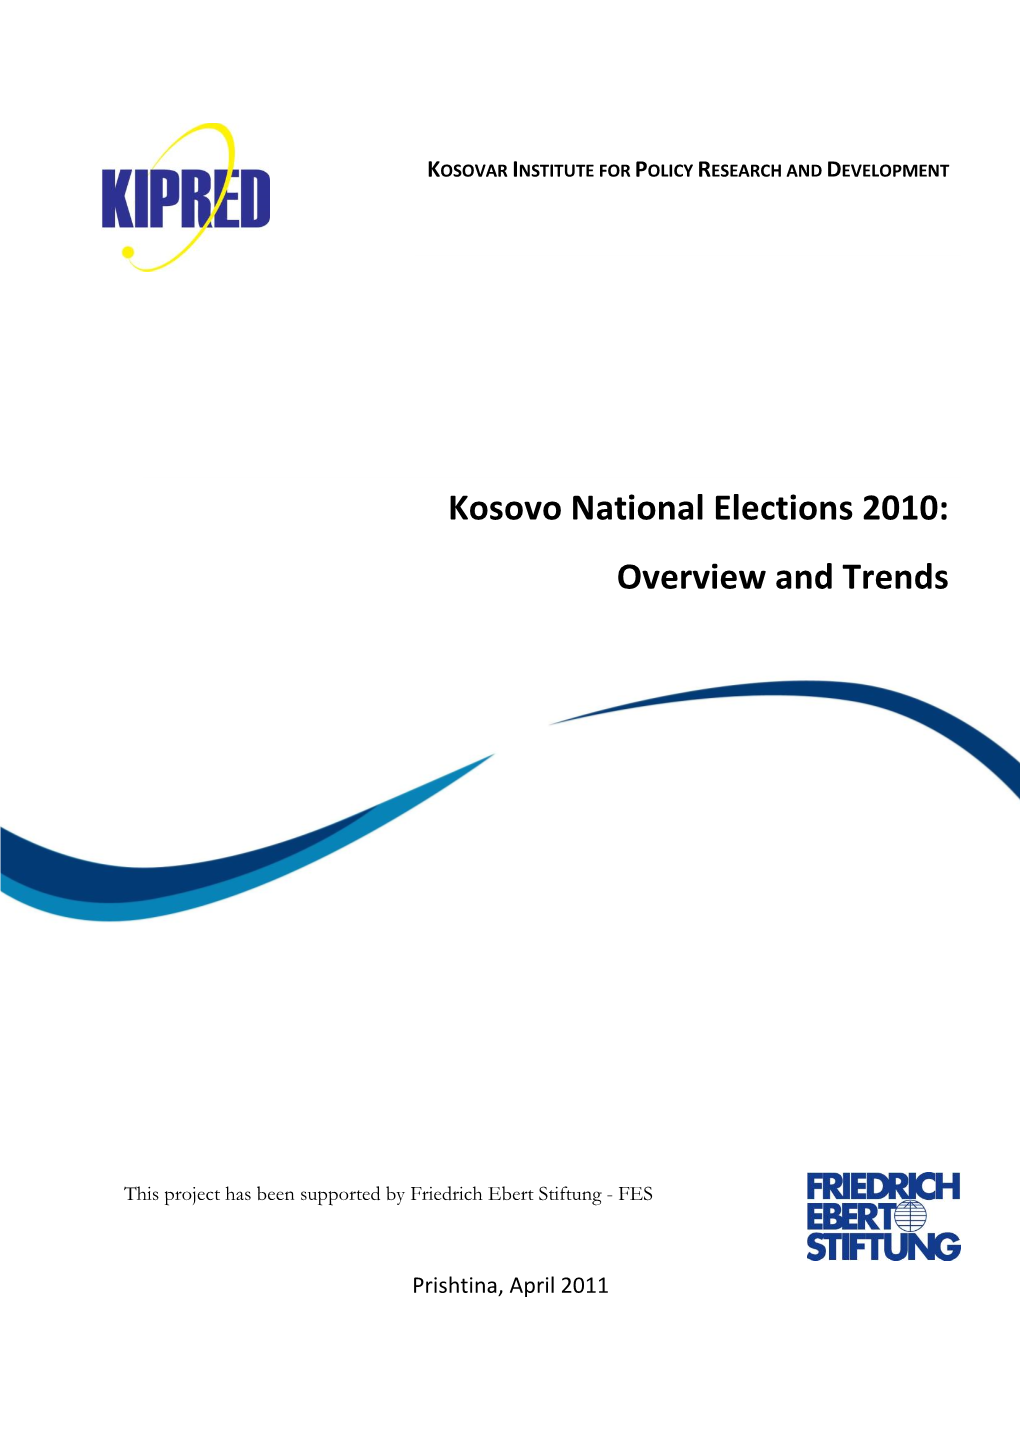 Kosovo National Elections 2010: Overview and Trends